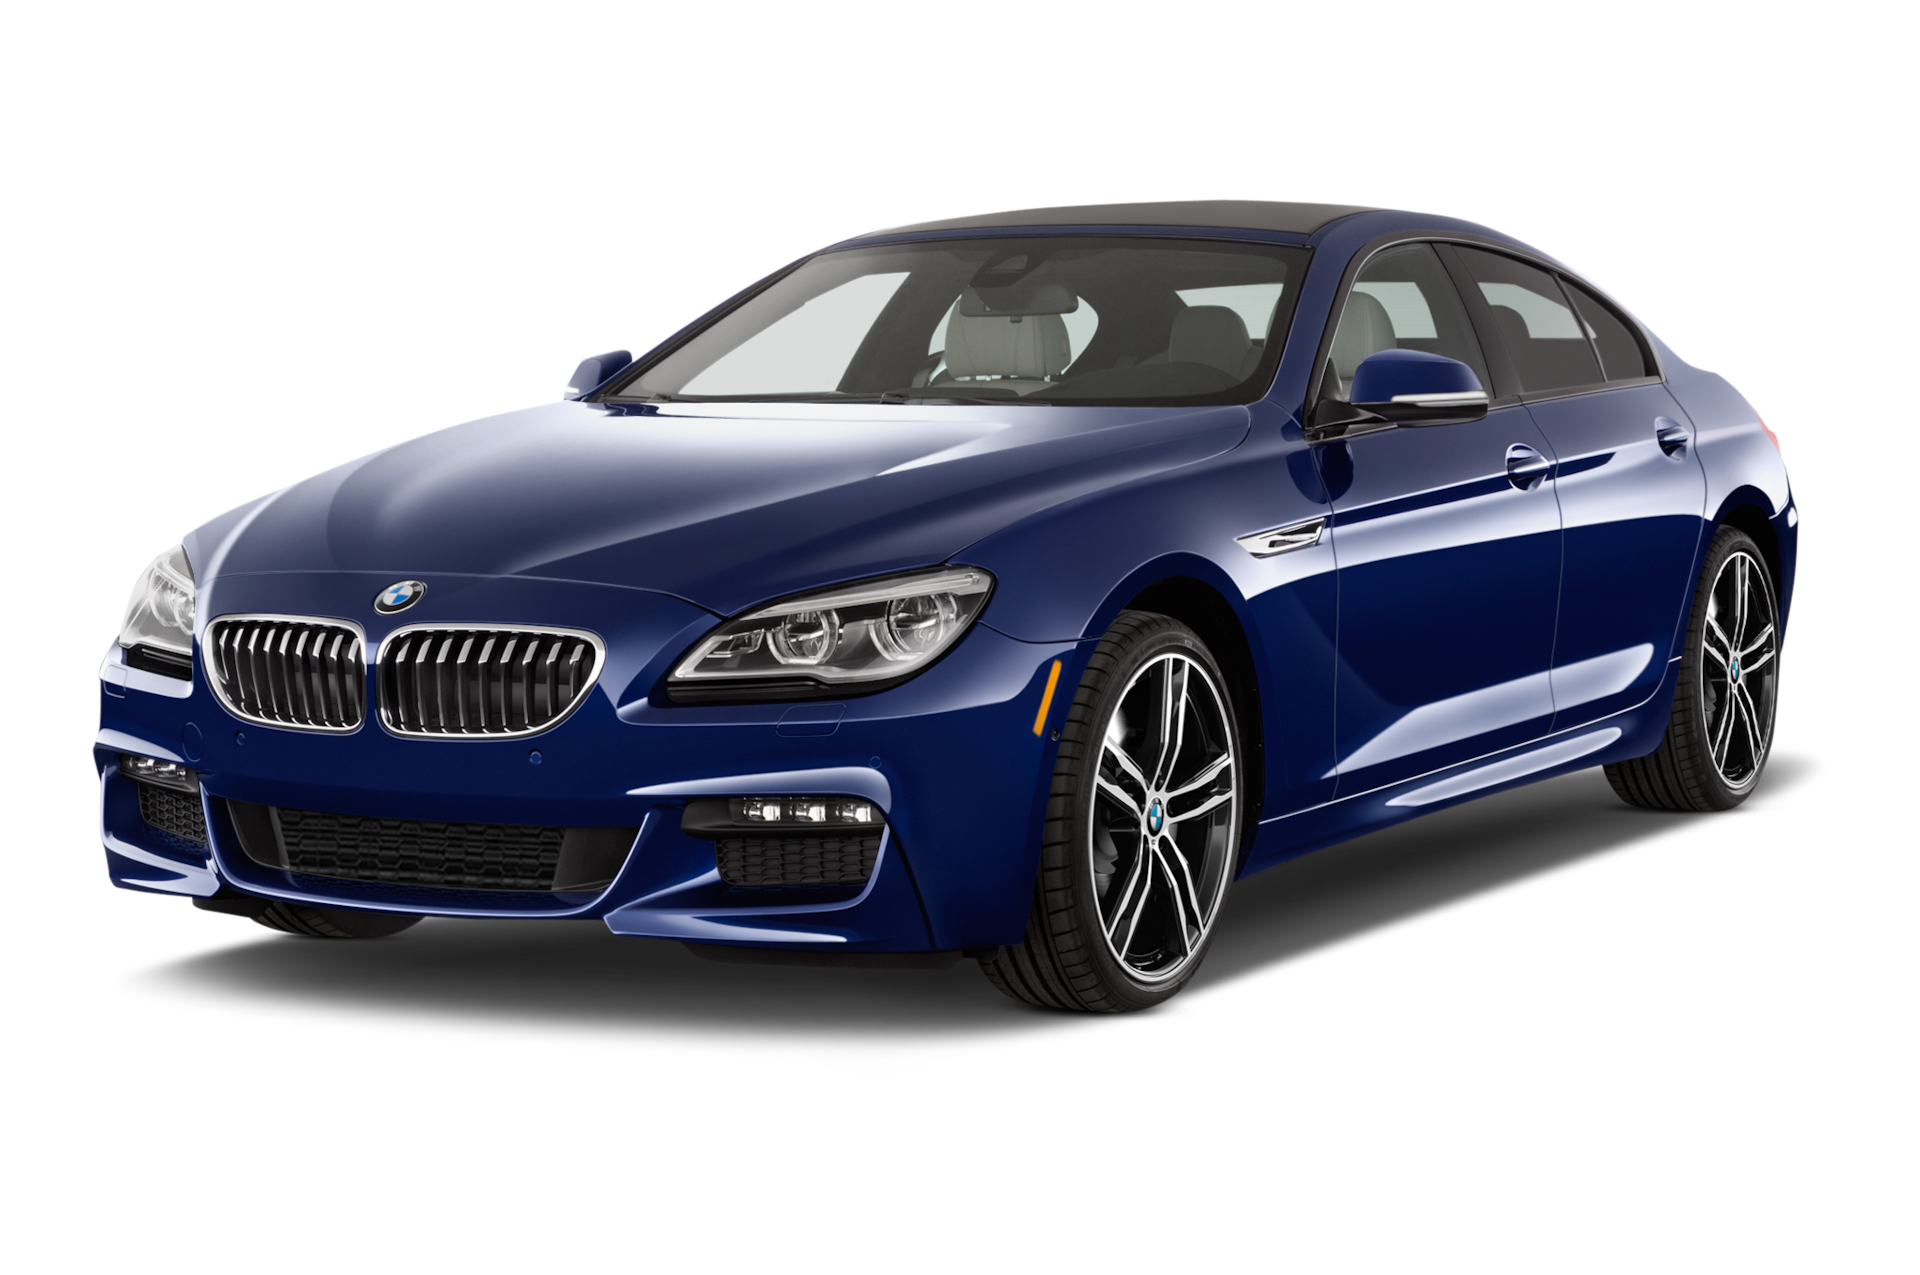 2019 BMW M6 Prices, Reviews, and Photos - MotorTrend